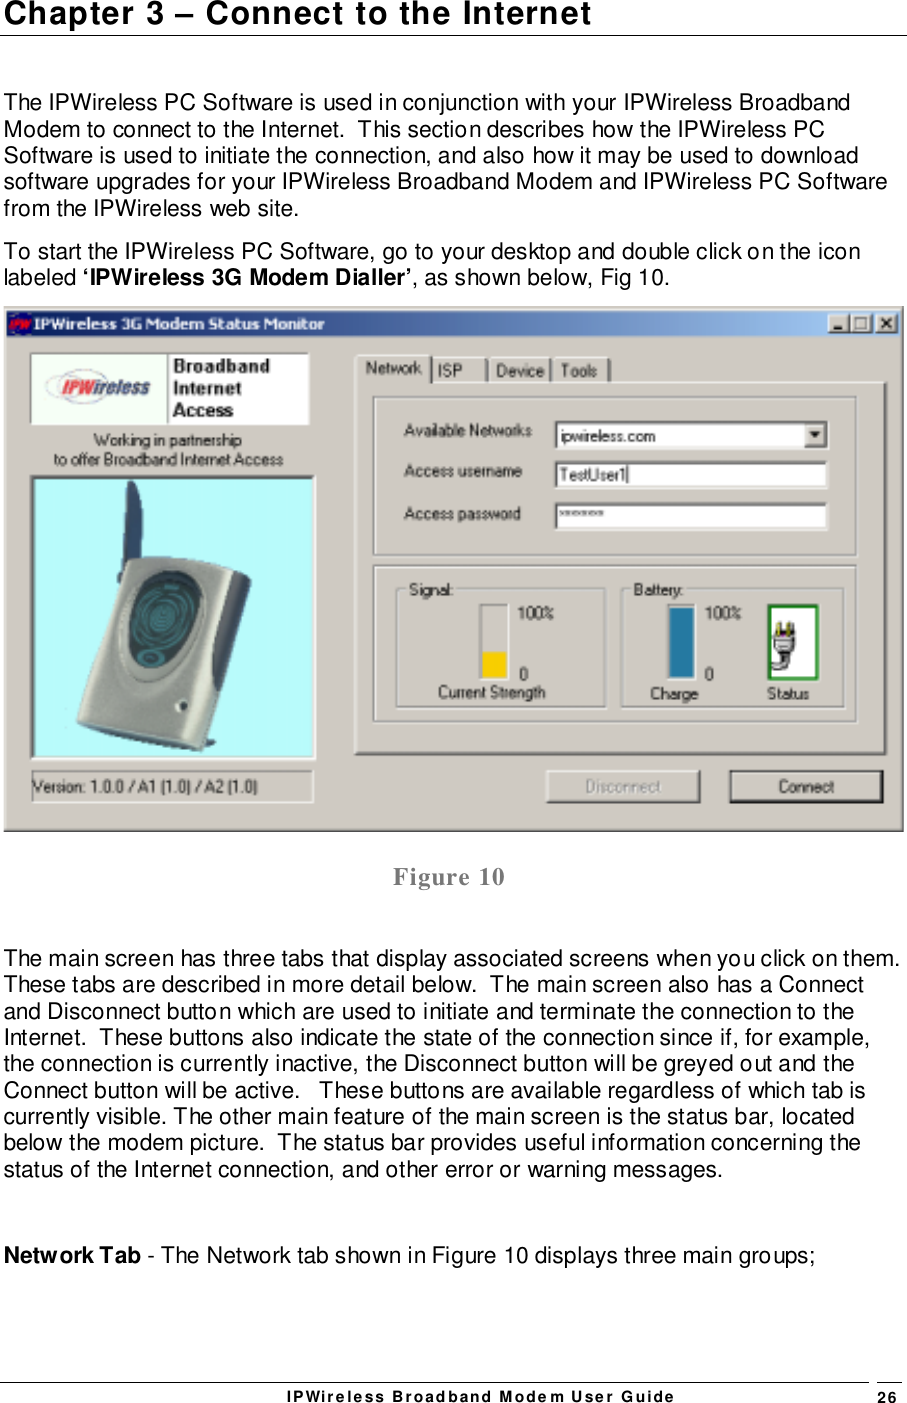 IPWireless Broadband Modem User Guide 26Chapter 3 – Connect to the InternetThe IPWireless PC Software is used in conjunction with your IPWireless BroadbandModem to connect to the Internet.  This section describes how the IPWireless PCSoftware is used to initiate the connection, and also how it may be used to downloadsoftware upgrades for your IPWireless Broadband Modem and IPWireless PC Softwarefrom the IPWireless web site.To start the IPWireless PC Software, go to your desktop and double click on the iconlabeled ‘IPWireless 3G Modem Dialler’, as shown below, Fig 10.Figure 10The main screen has three tabs that display associated screens when you click on them.These tabs are described in more detail below.  The main screen also has a Connectand Disconnect button which are used to initiate and terminate the connection to theInternet.  These buttons also indicate the state of the connection since if, for example,the connection is currently inactive, the Disconnect button will be greyed out and theConnect button will be active.   These buttons are available regardless of which tab iscurrently visible. The other main feature of the main screen is the status bar, locatedbelow the modem picture.  The status bar provides useful information concerning thestatus of the Internet connection, and other error or warning messages.Network Tab - The Network tab shown in Figure 10 displays three main groups;